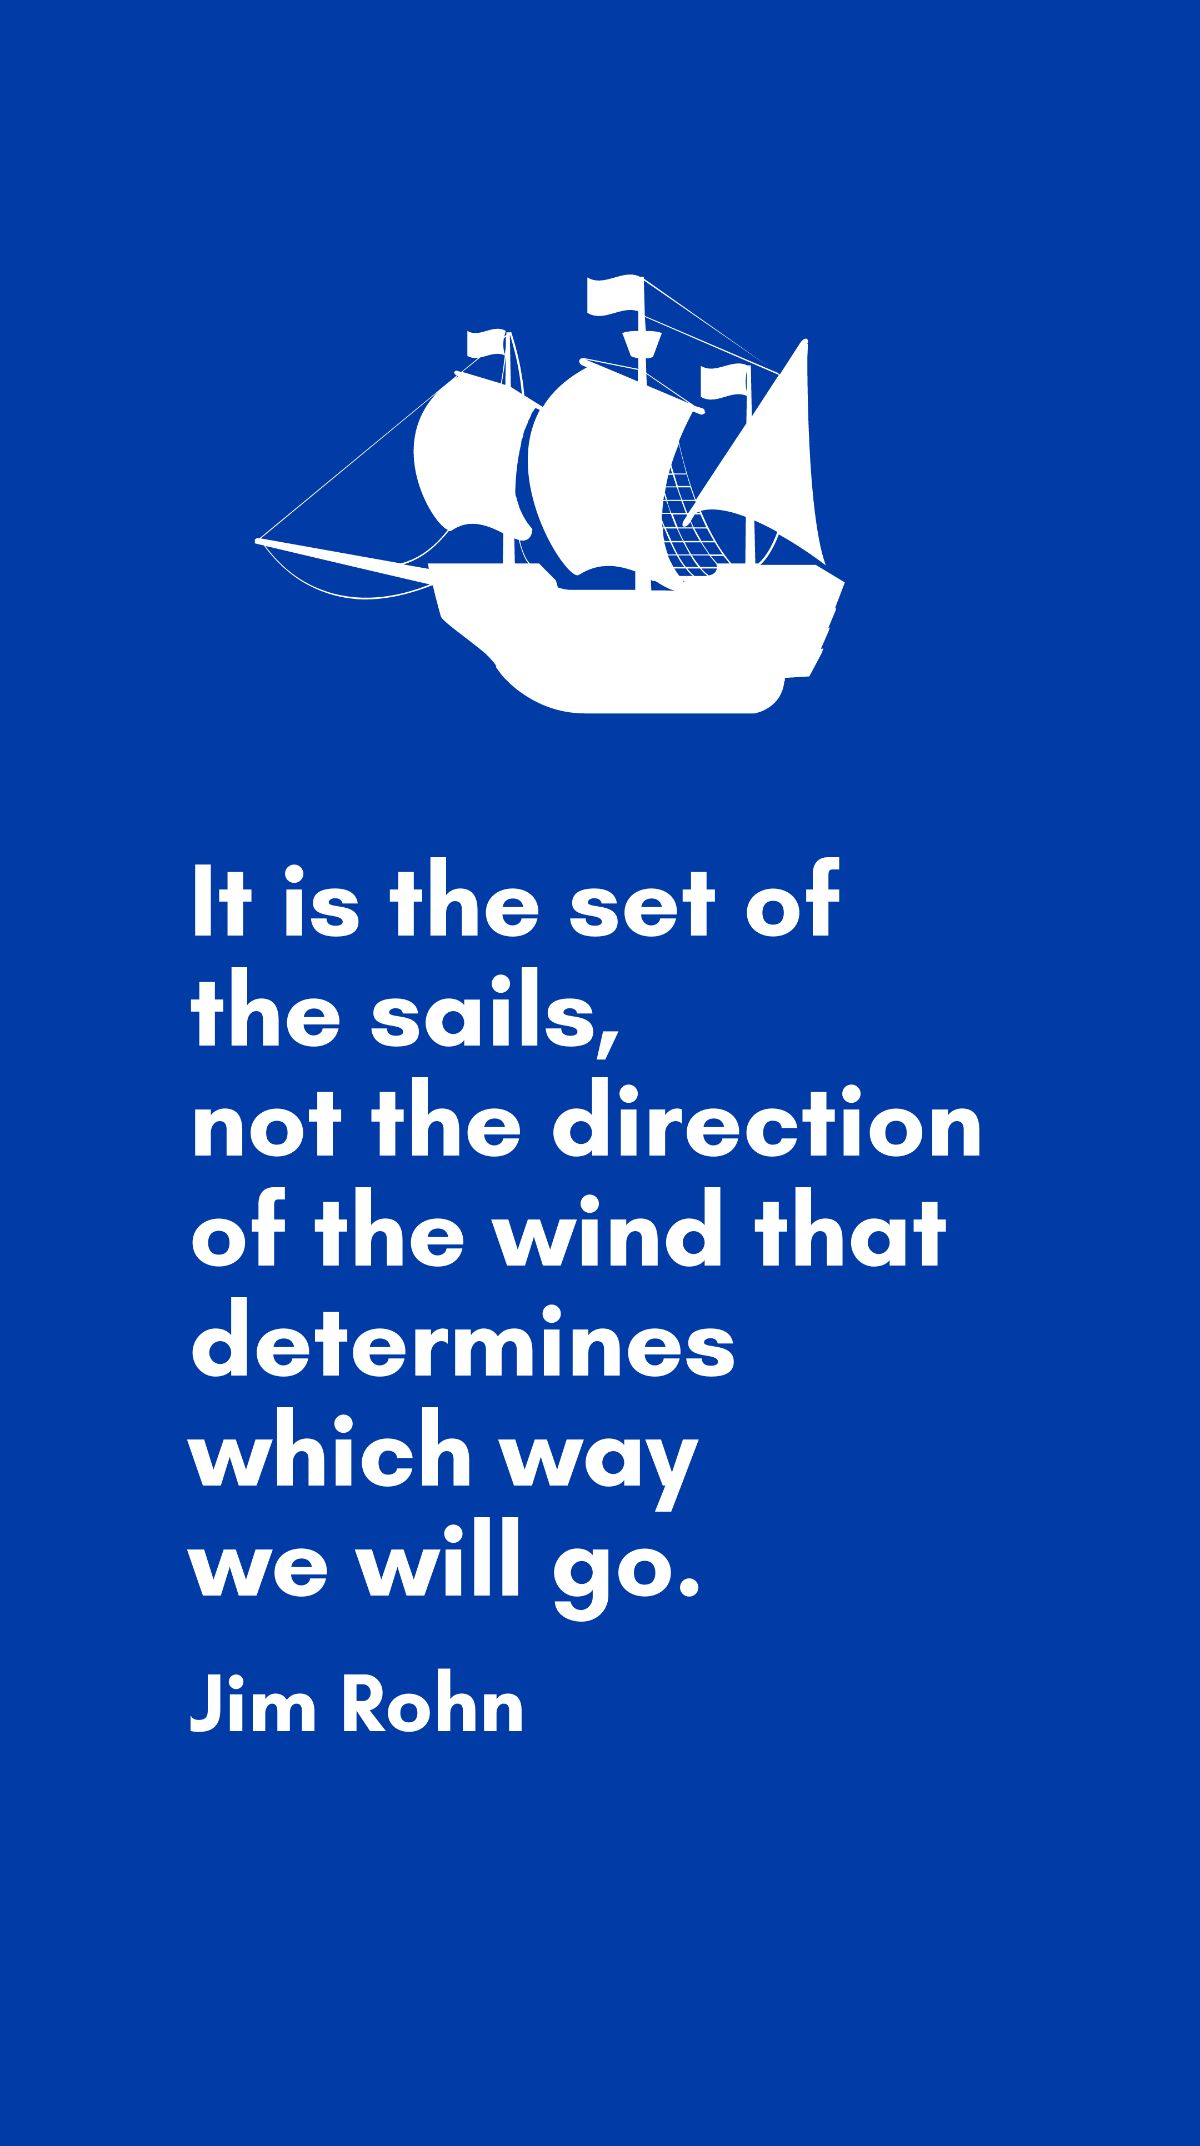 Jim Rohn - It is the set of the sails, not the direction of the wind that determines which way we will go.